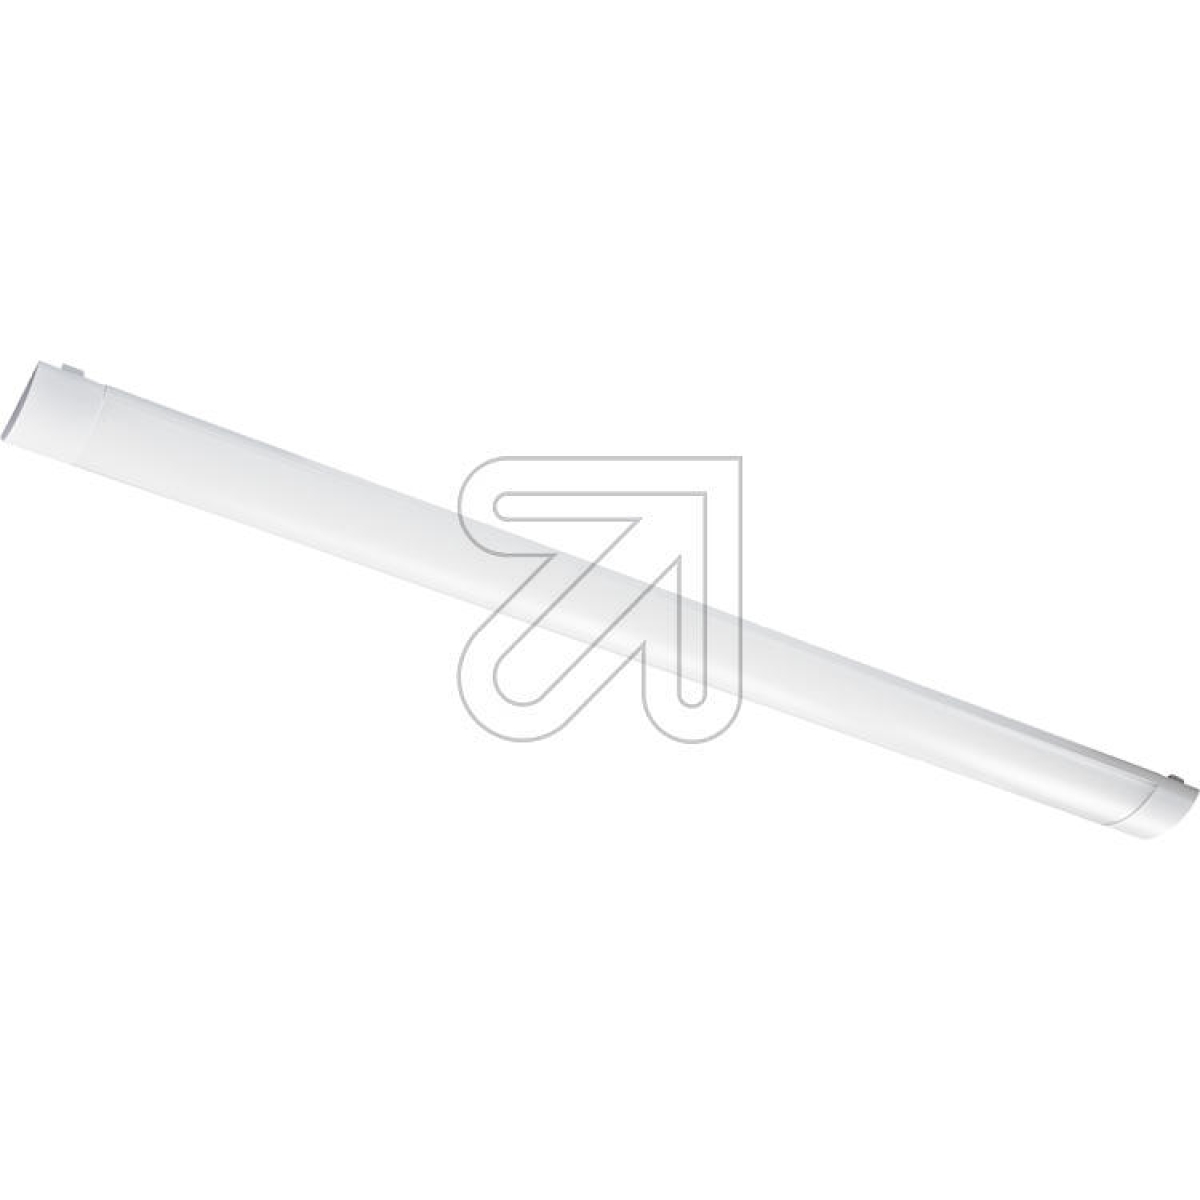 EVNLED surface mounted light white 4000K 48W L15004840W L15004840WArticle-No: 624325